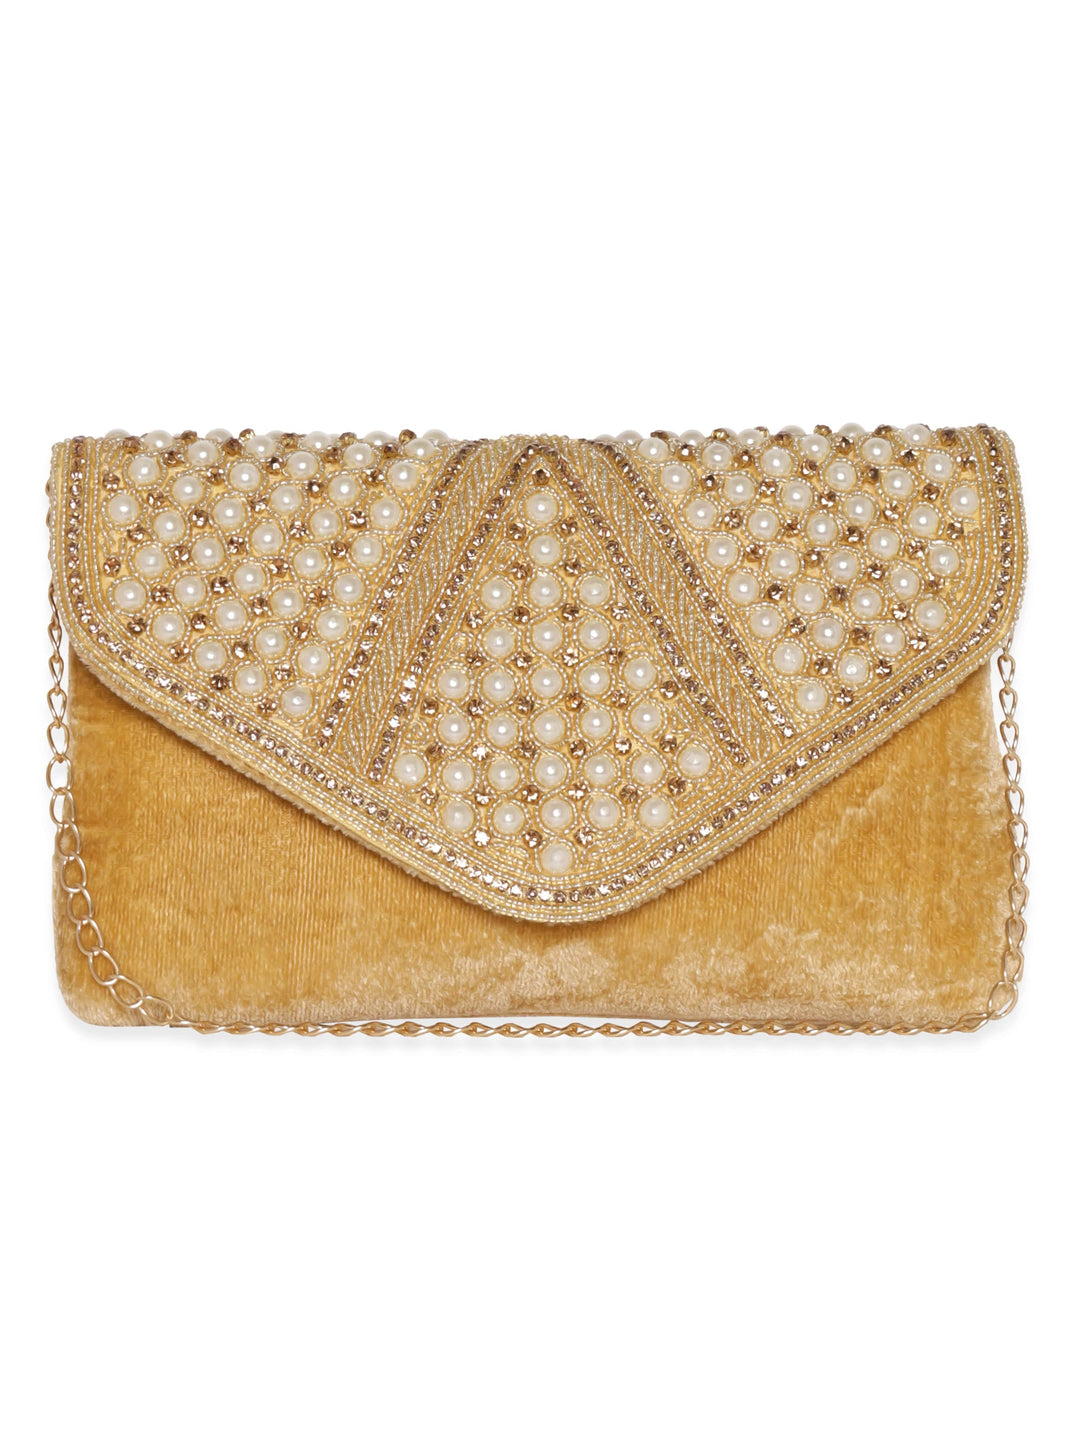 Rubans Beige Clutch with Stone and Pearl Embellishment Handbag, Wallet Accessories & Clutches